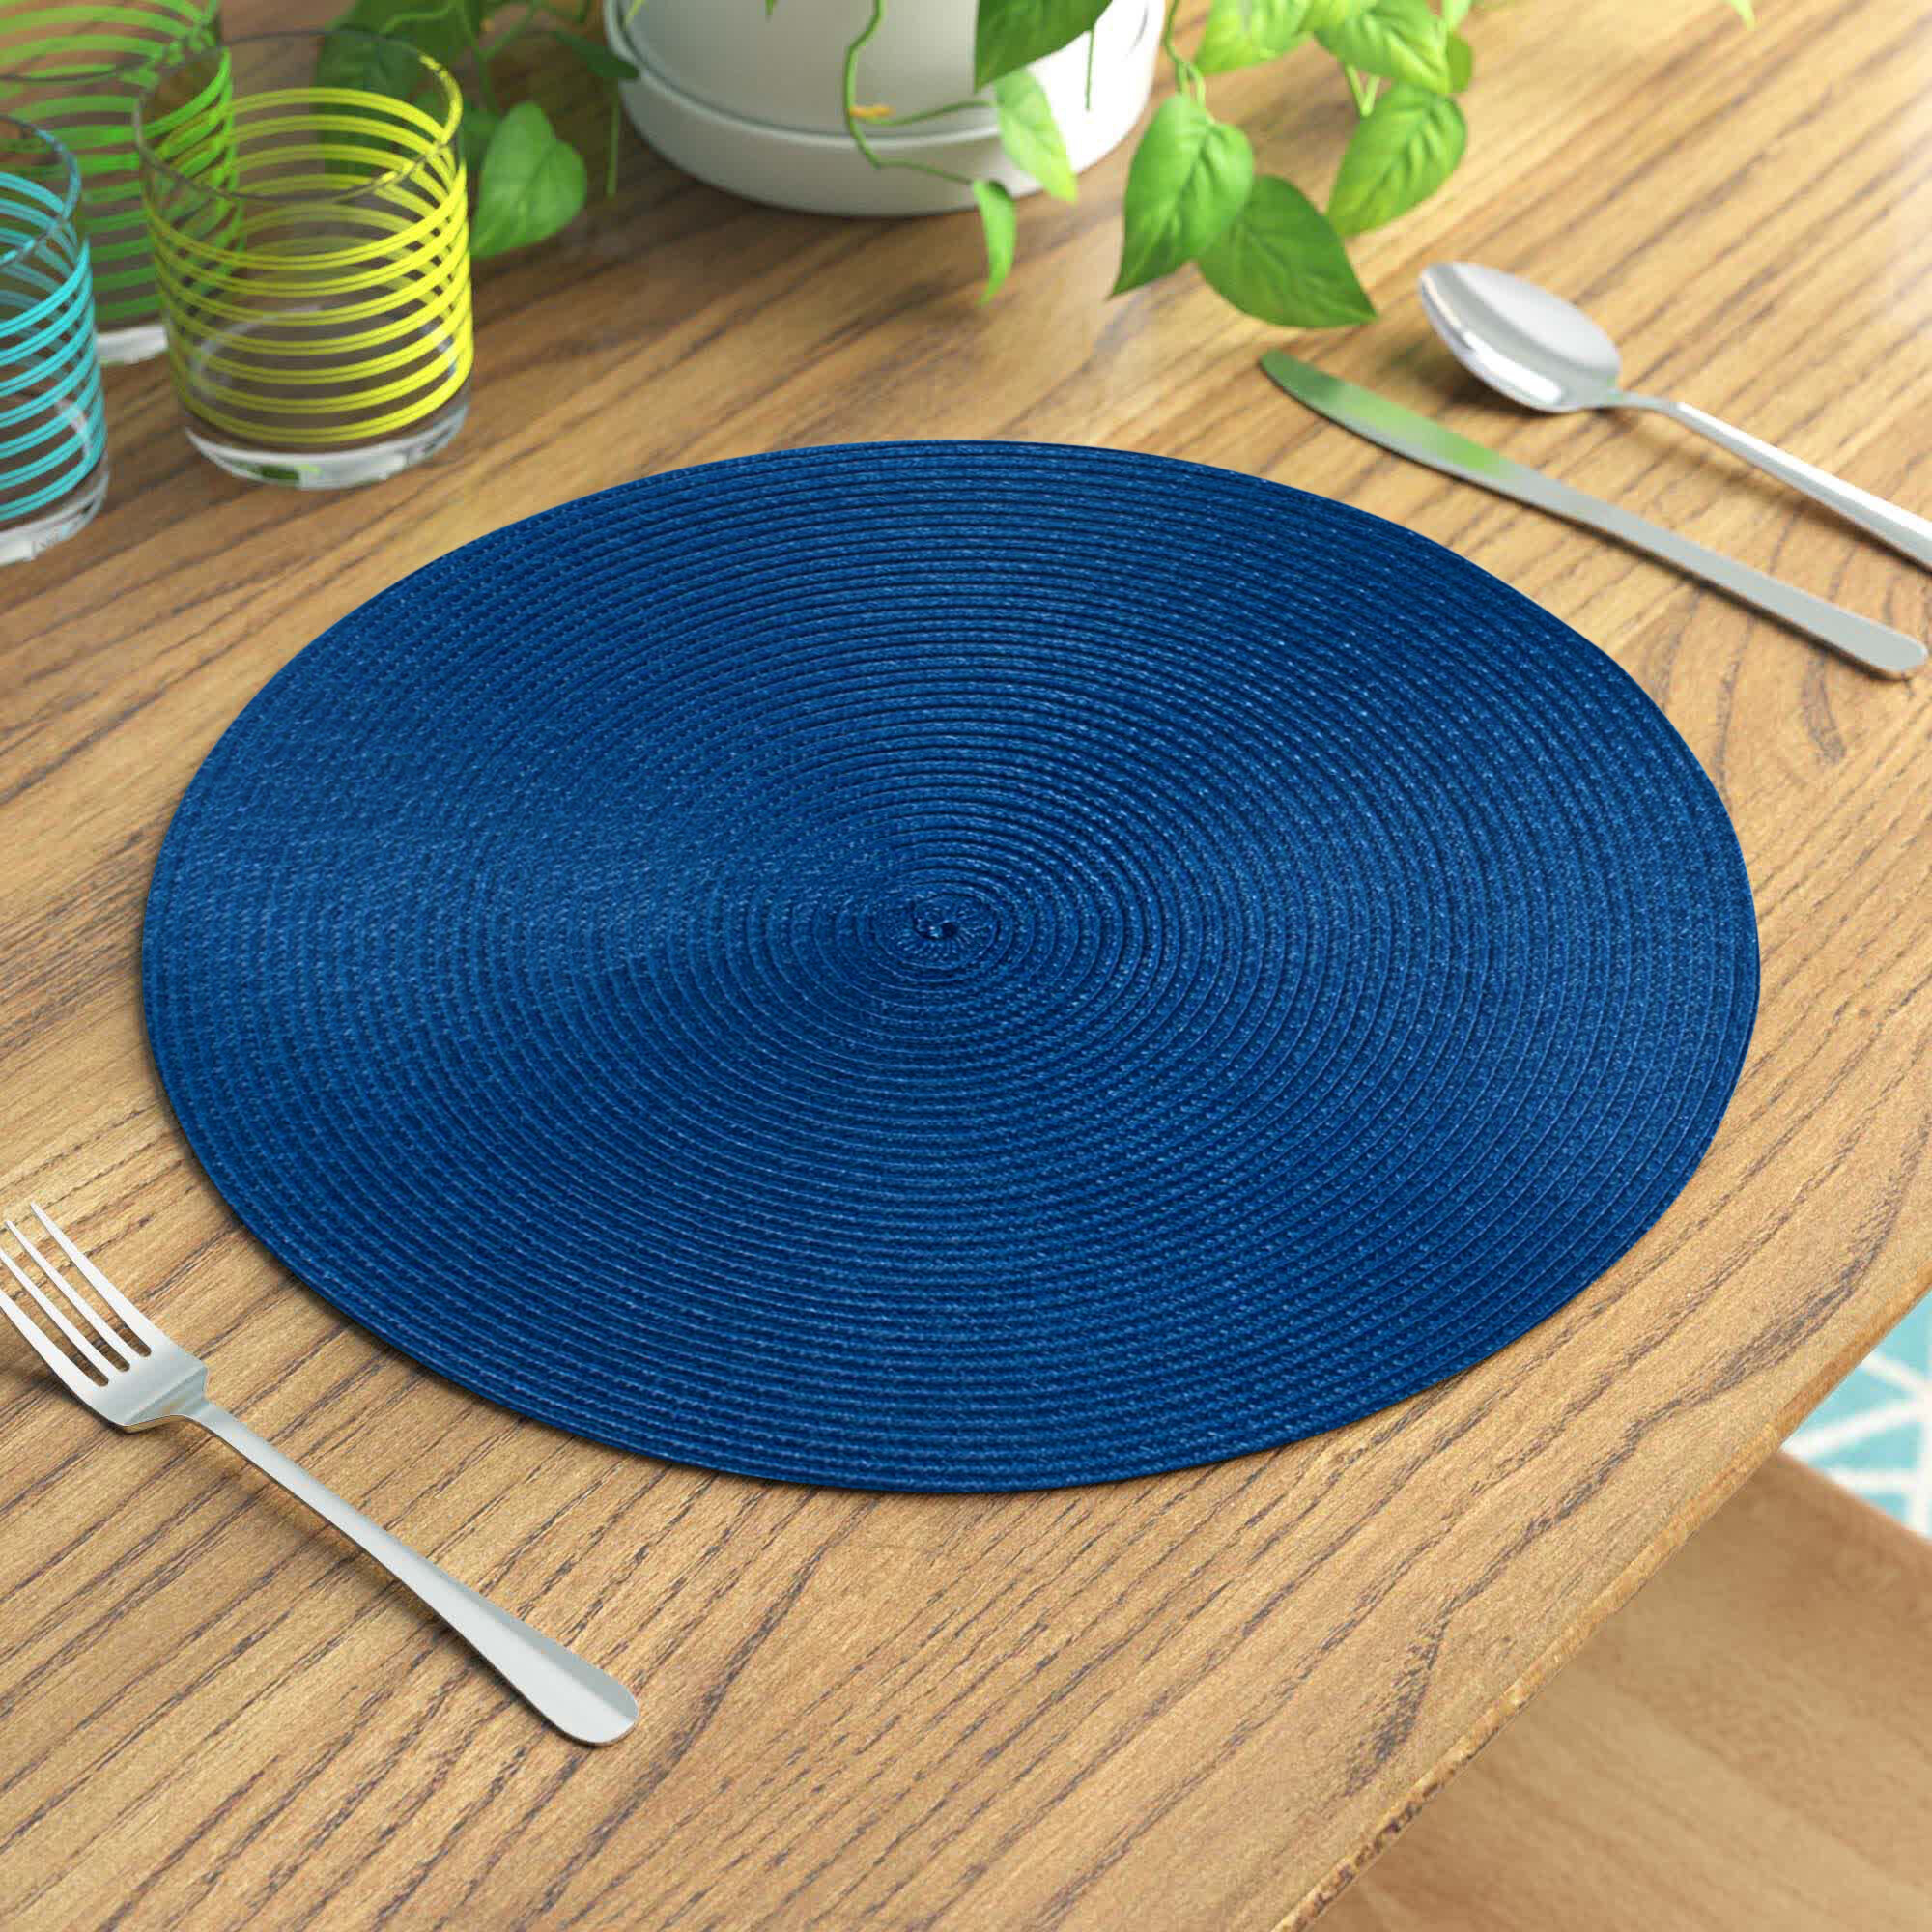 Mountain Line Drawing Qilmy Round Place Mats for Dining Table Mat Heat-Resistant Placemat Circle for Kitchen/Party 15.4 Blue